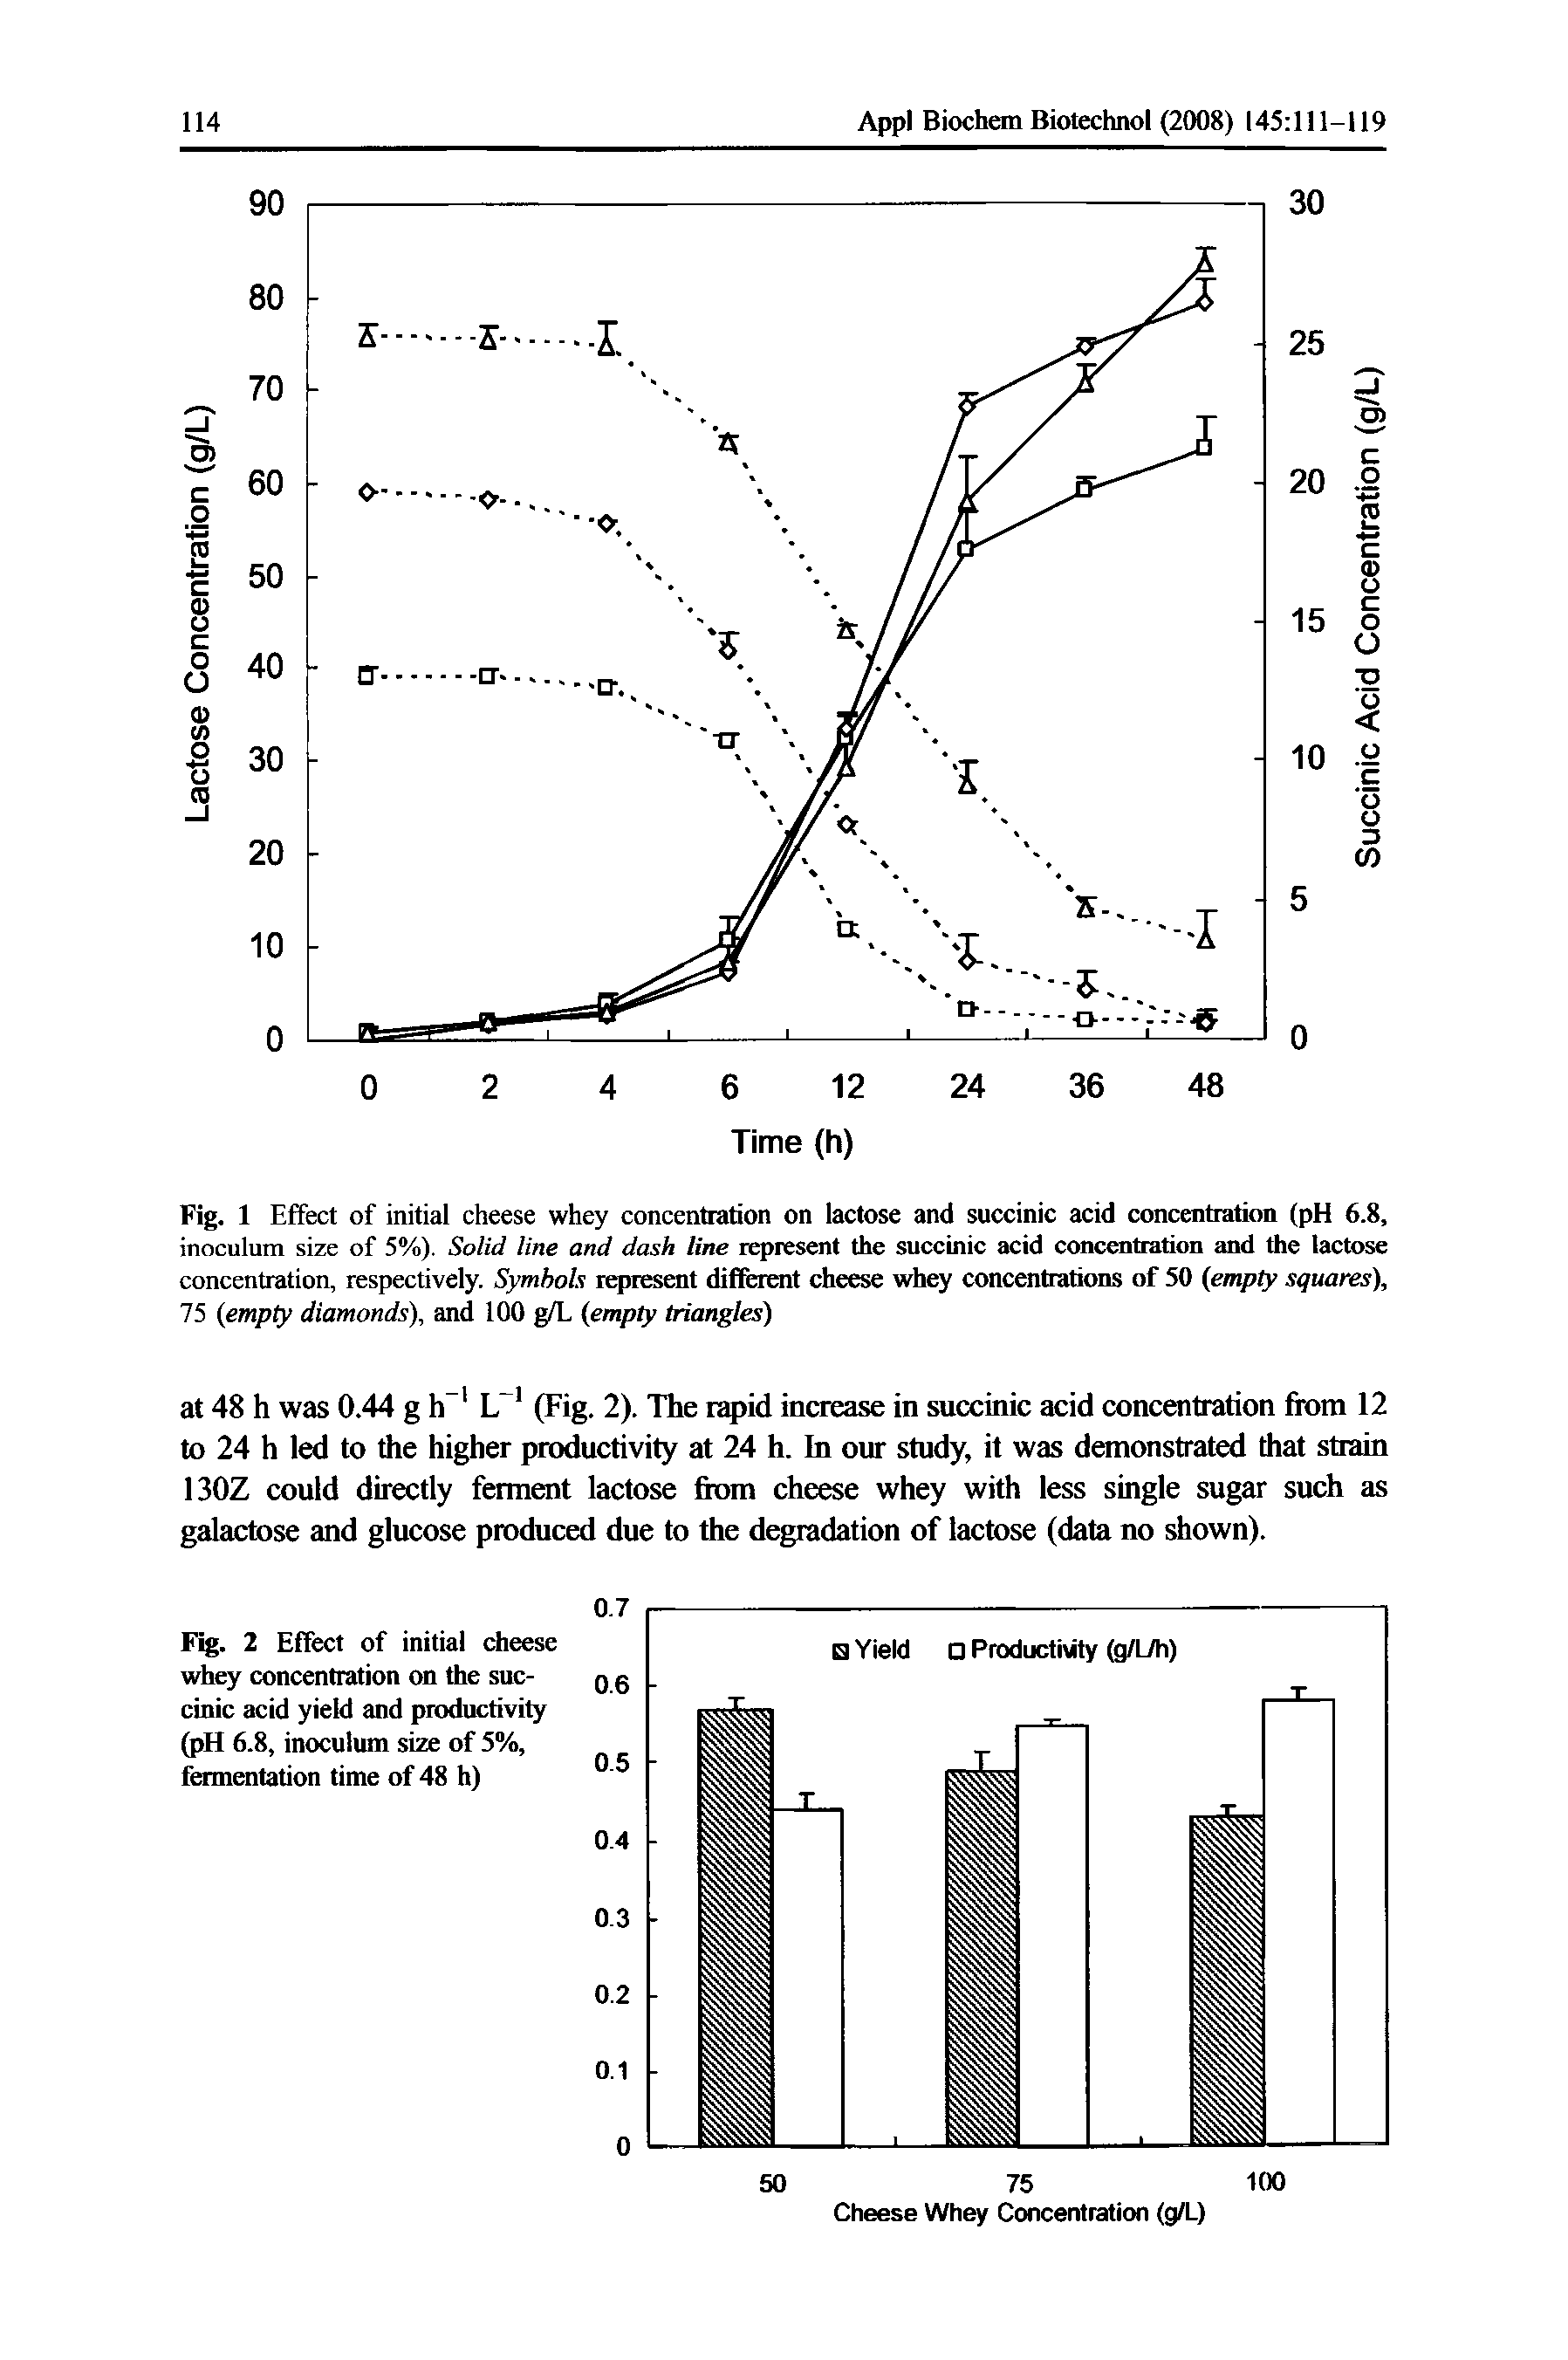 Fig. 1 Effect of initial cheese whey concentration on lactose and succinic acid concentration (pH 6.8, inoculum size of 5%). Solid line and dash line represent the succinic acid concentration and the lactose concentration, respectively. Symbols represent difieient cheese whey concentrations of 50 (empty squares), 75 (empty diamonds), and 100 g/L (empty triangles)...